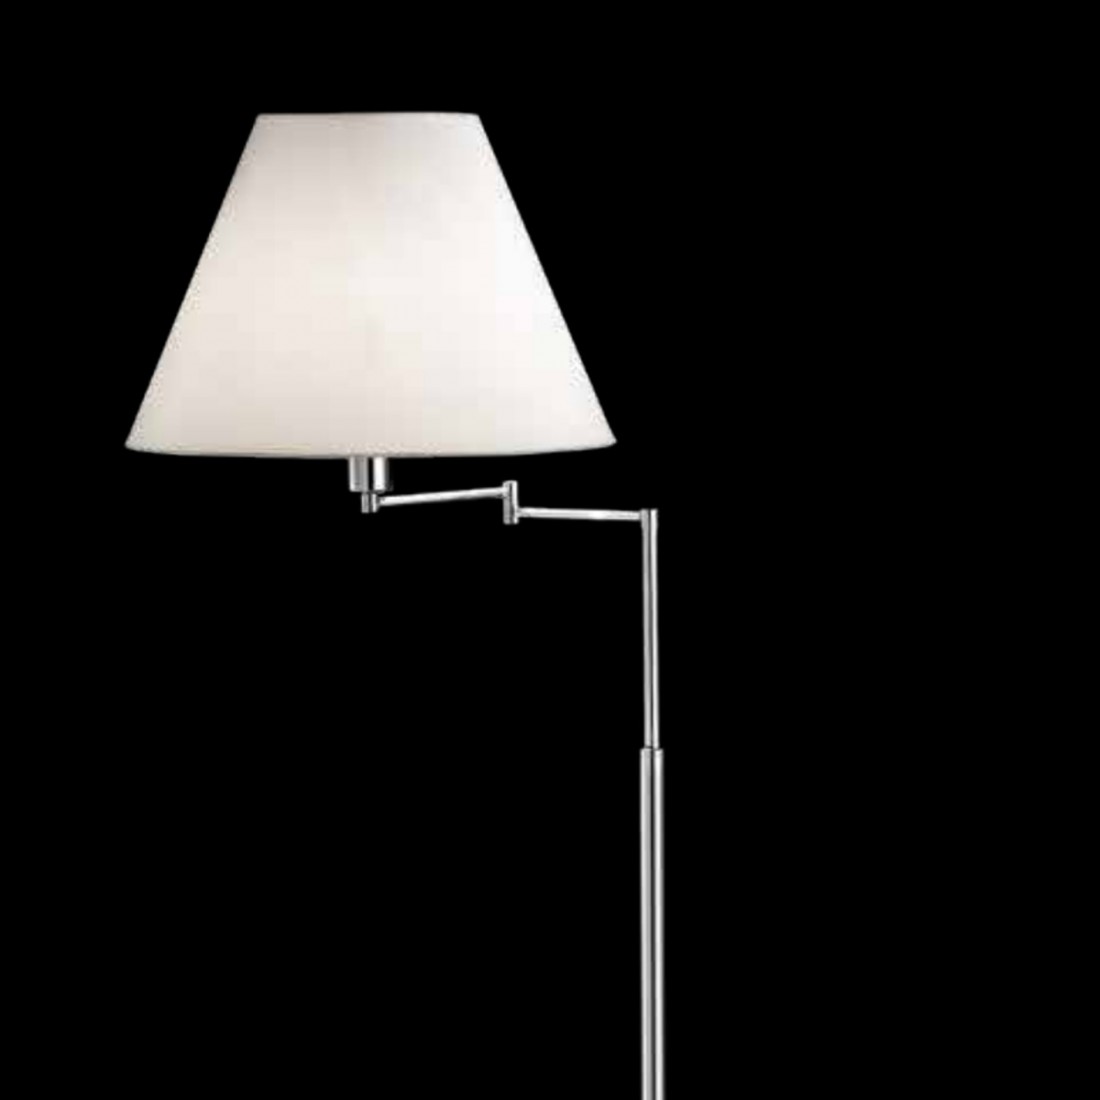 Lampadaire moderne Perenz DOME HOTEL 4018 CL E27 LED